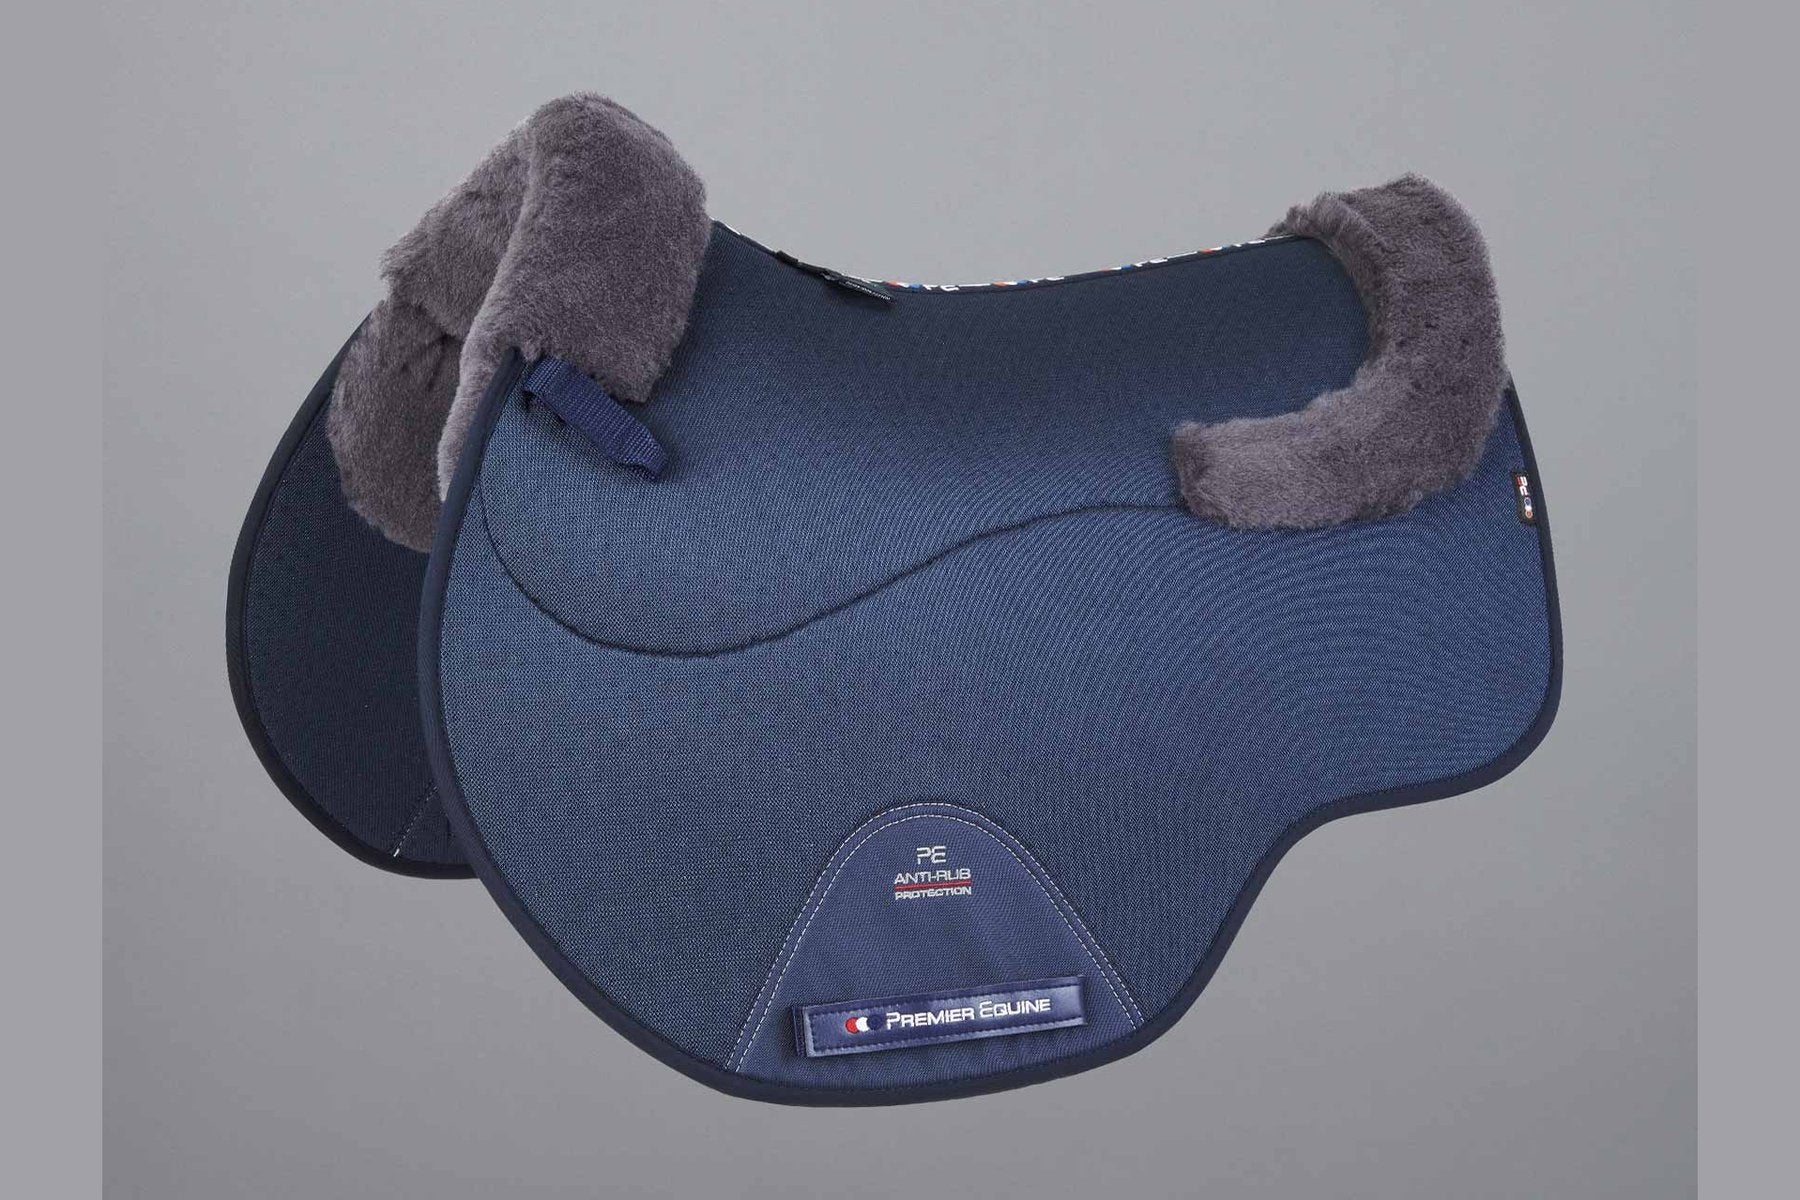 Description:Close Contact Airtechnology Shockproof Wool Saddle Pad - GP/Jump Square_Colour:Navy/Grey Wool_Position:1